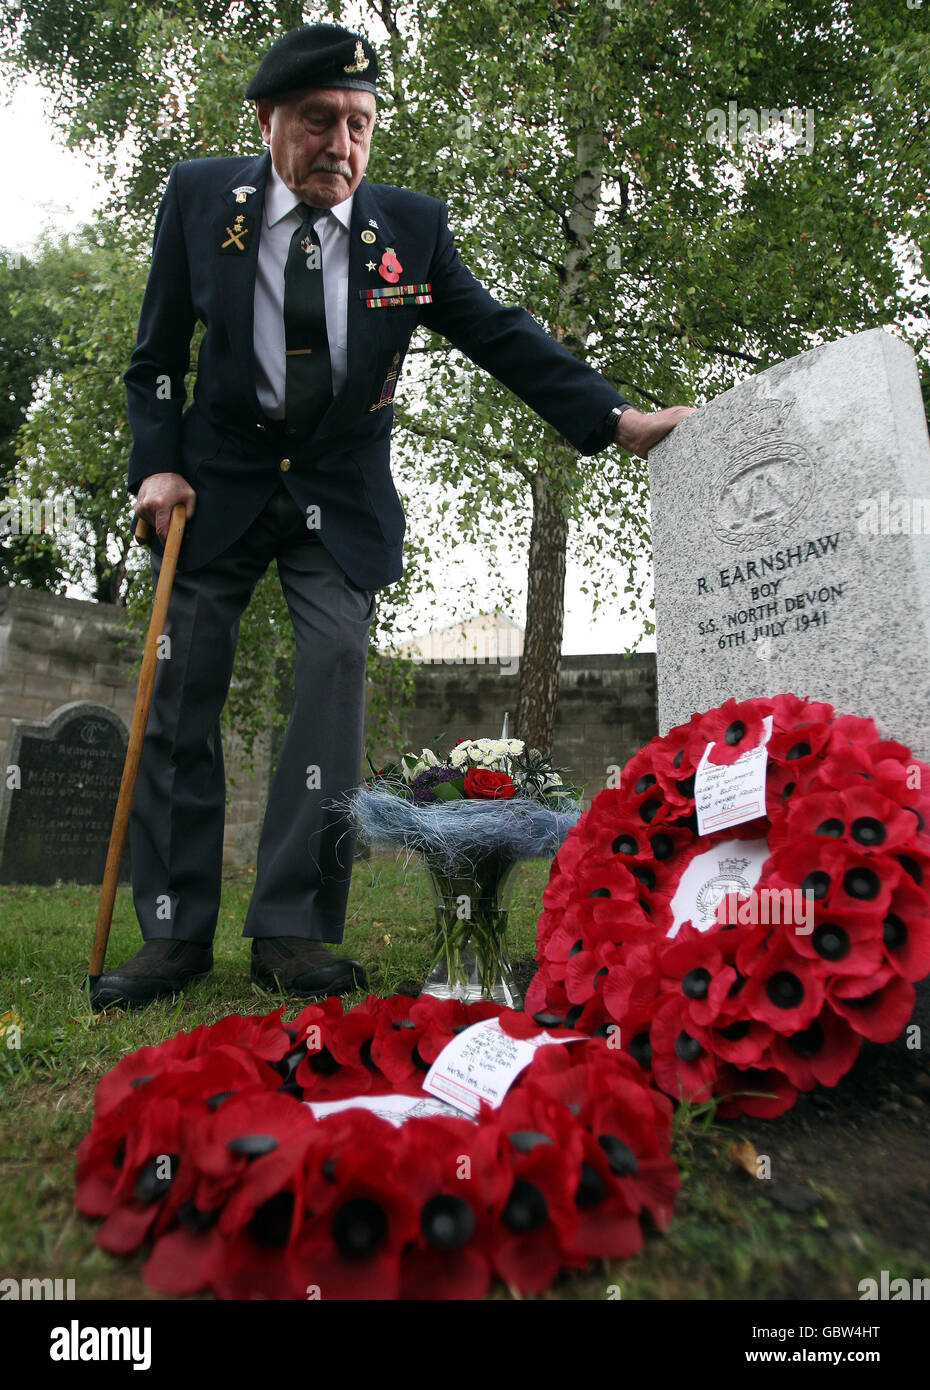 Former machine gunner Alf Tubb stands by a headstone at Comely Bank Cemetery in Edinburgh, in memory of Reginald Earnshaw, his friend and former shipmate who was one of the youngest British service casualties of the Second World War. Stock Photo